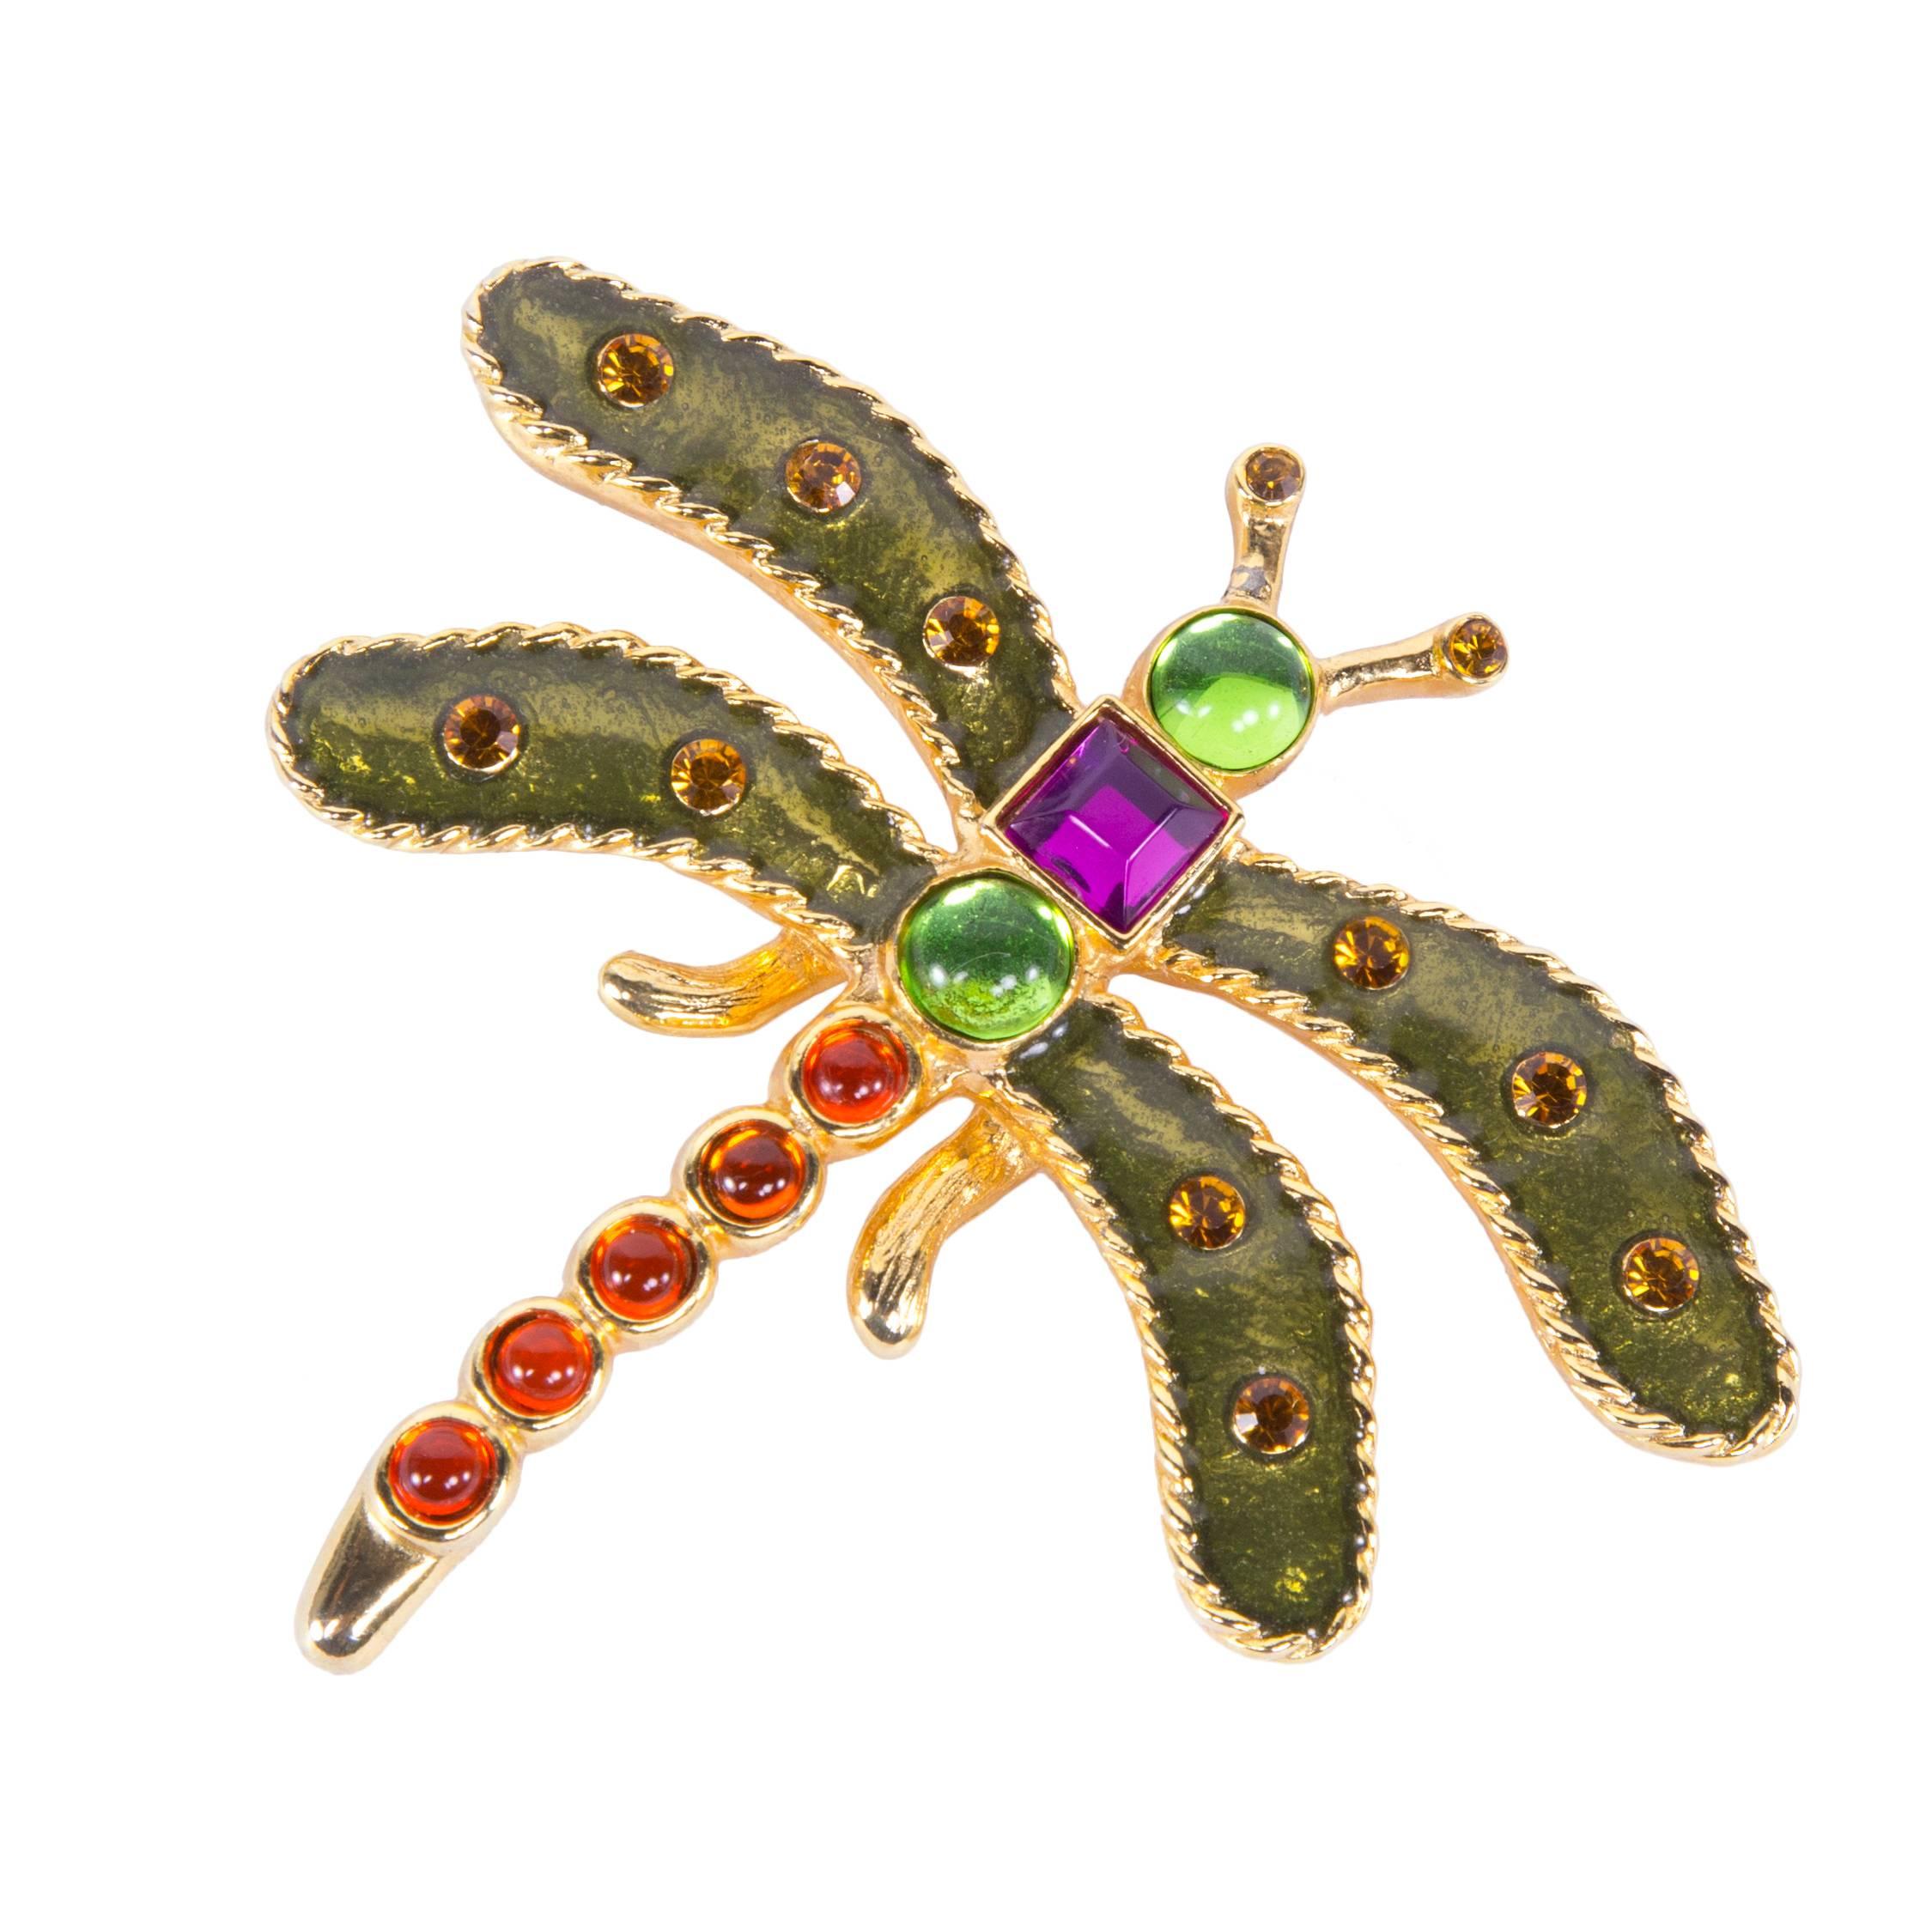 Carlisle Couture Gripoix Jeweled Glass Dragonfly Statement Brooch Pin